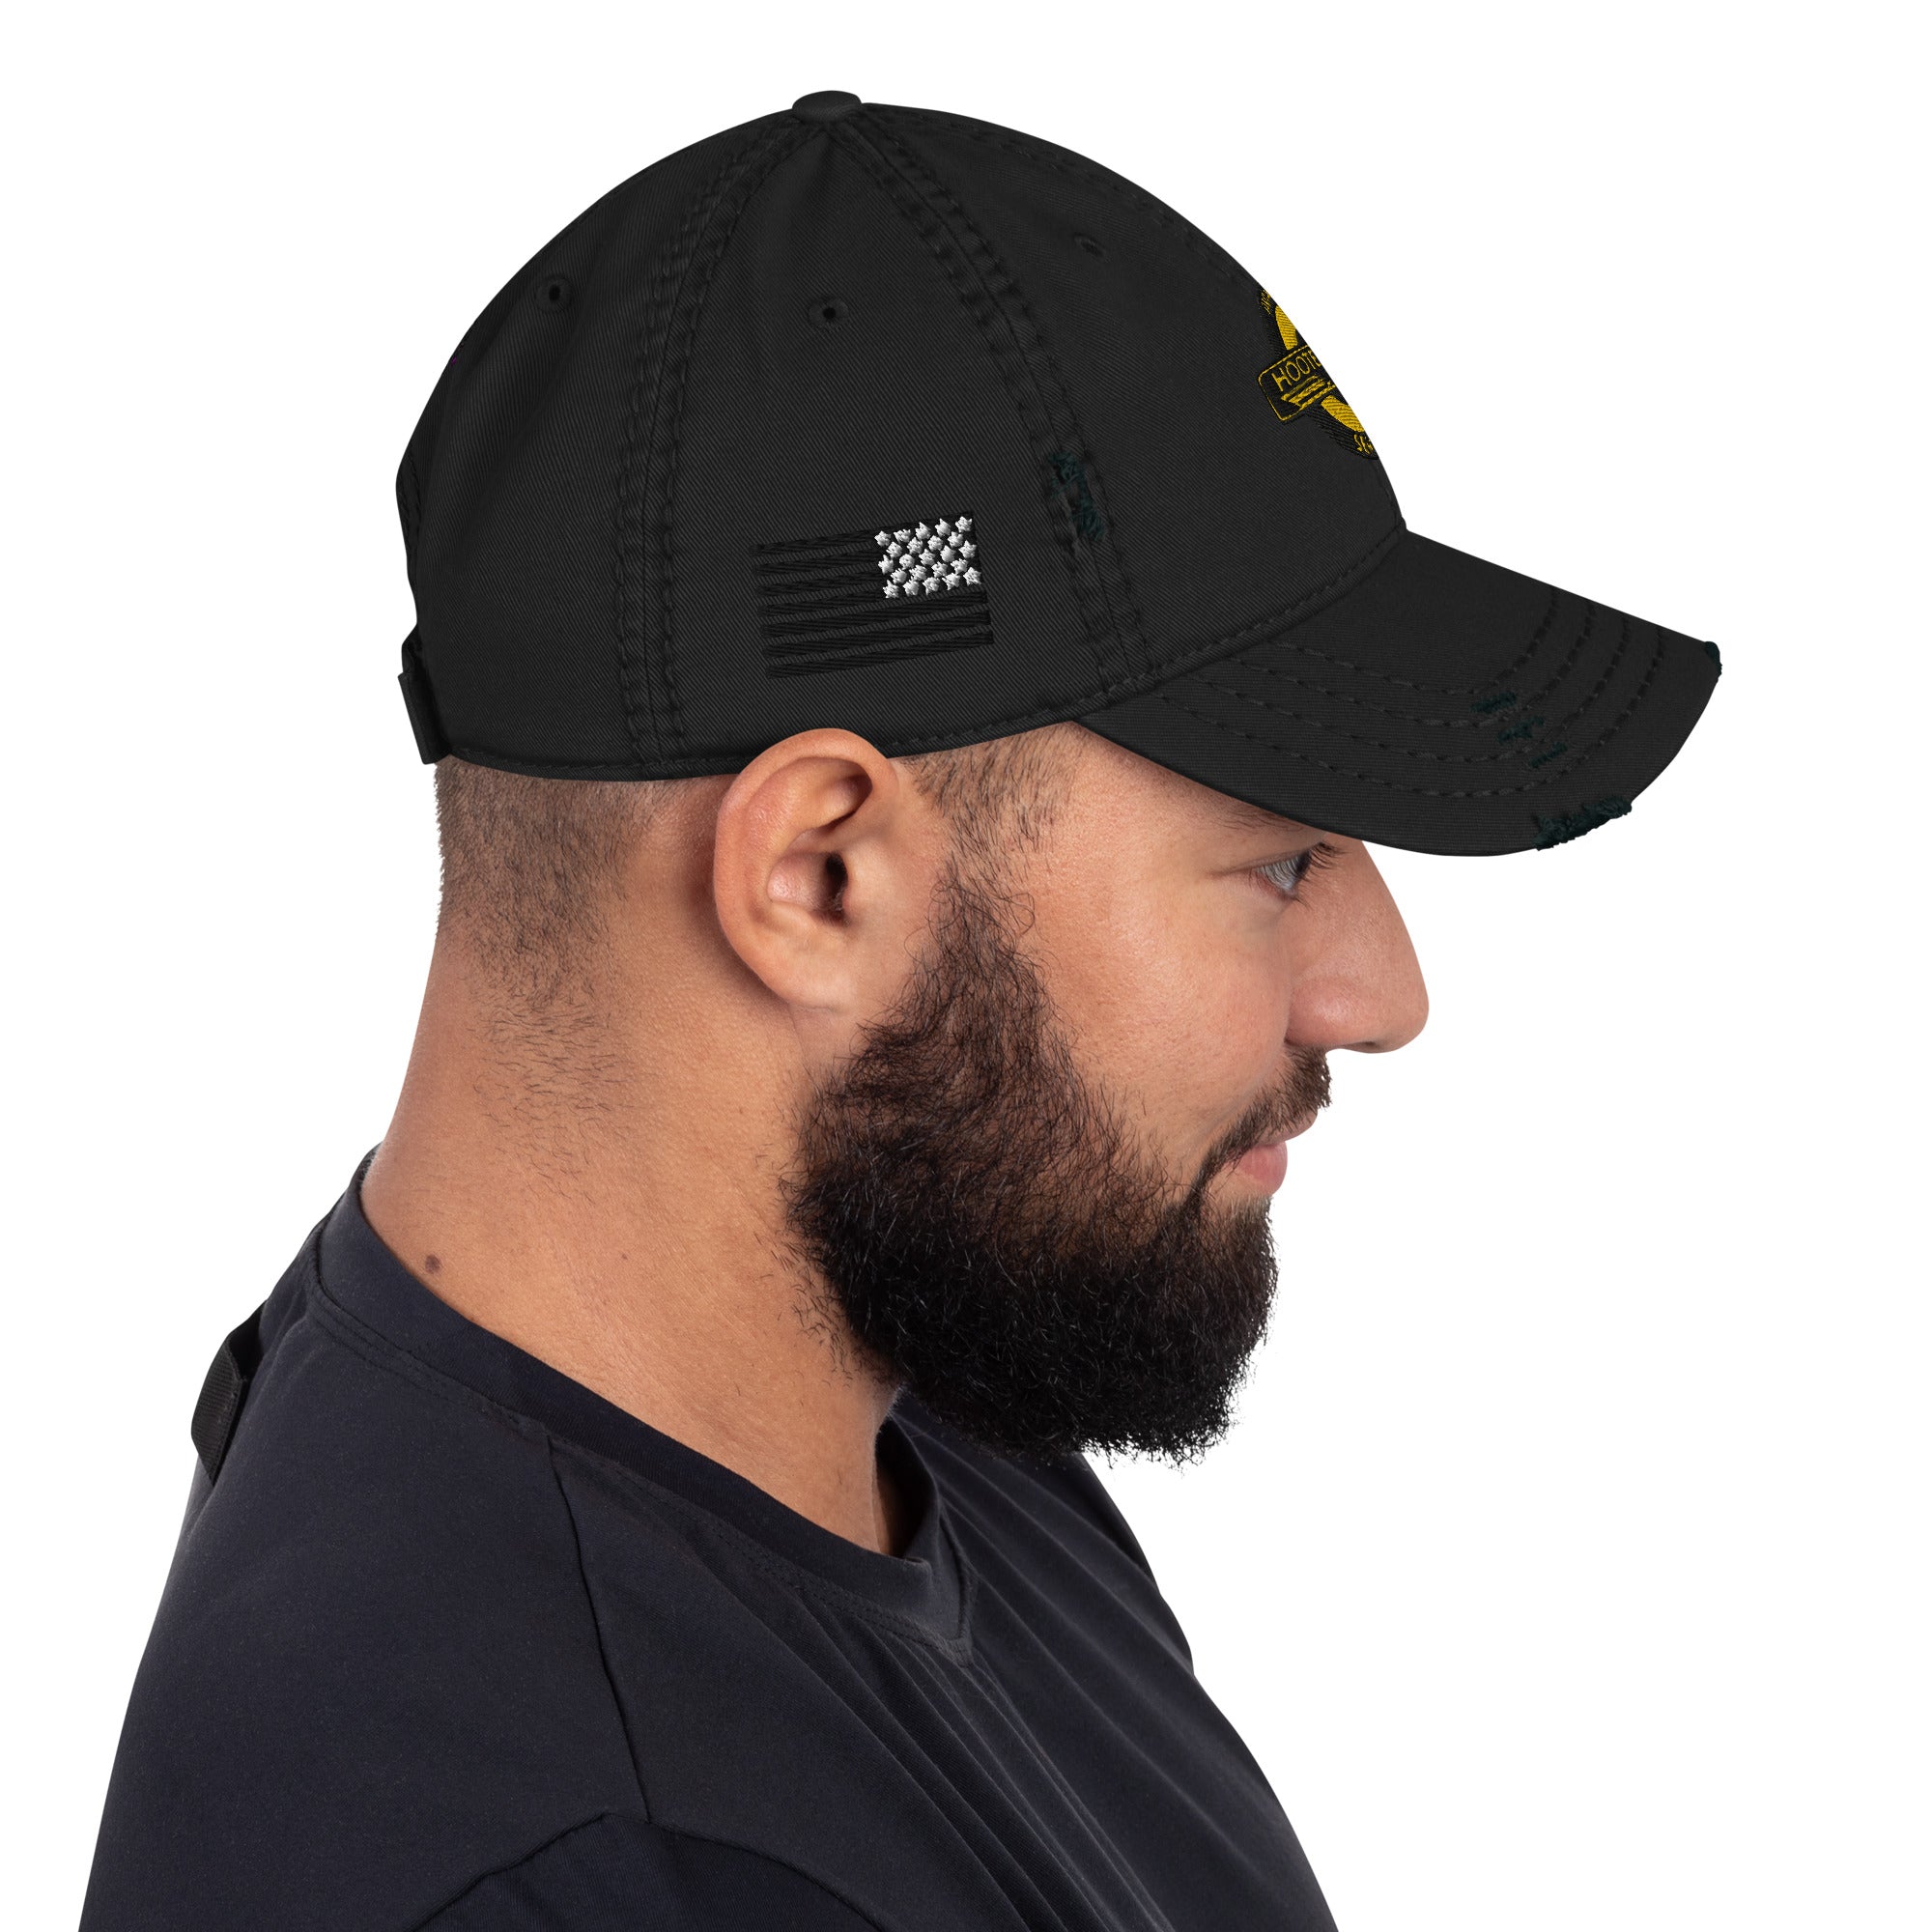 Hooter Bros Aviation Service Embroidered Distressed Dad Hat by Ruck & Rotor